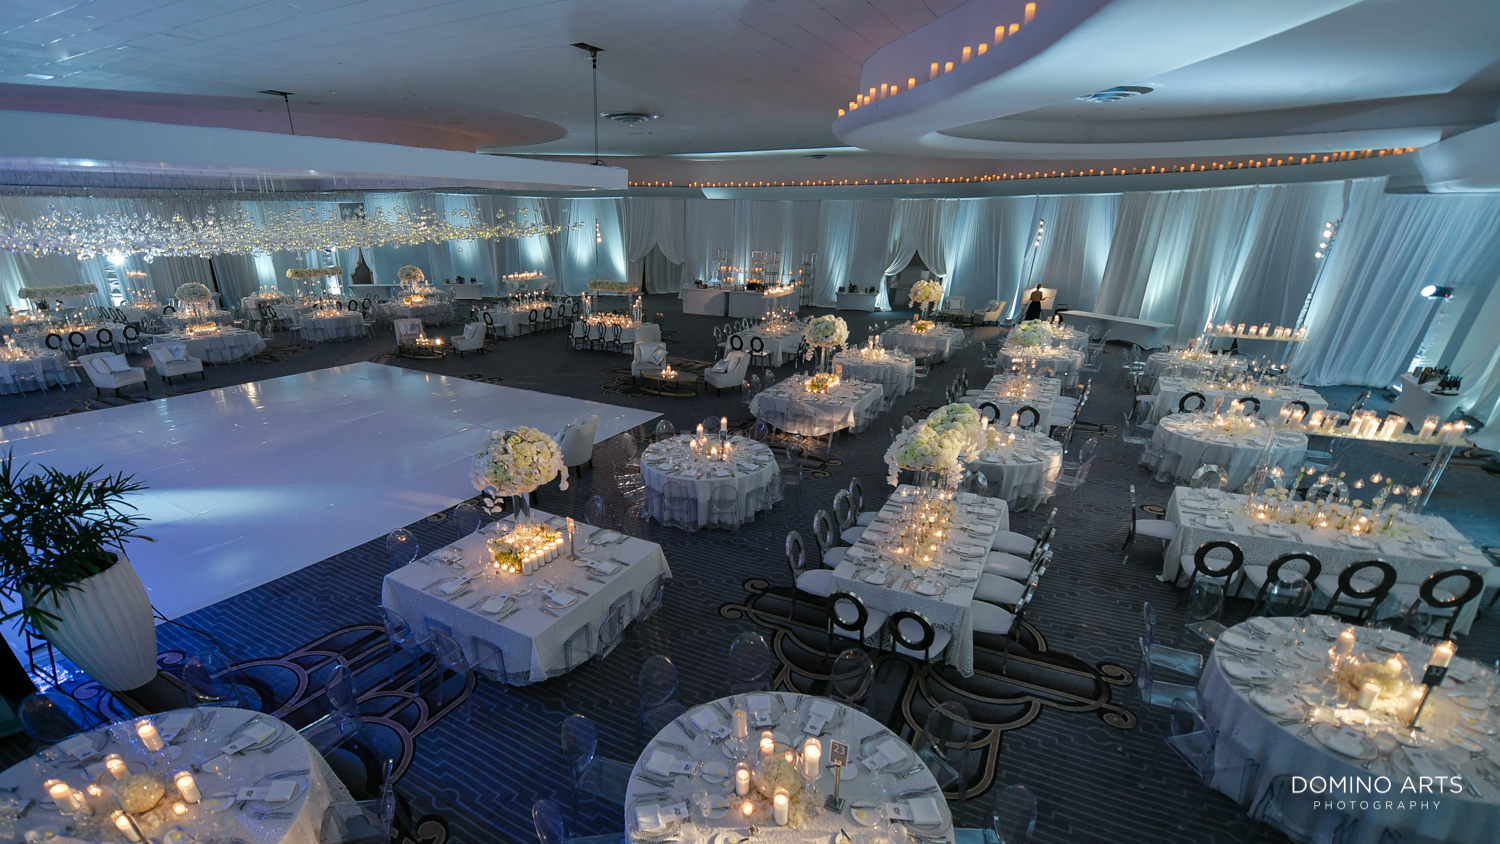 Beautiful room decor at luxury wedding pictures at fontainebleau miami